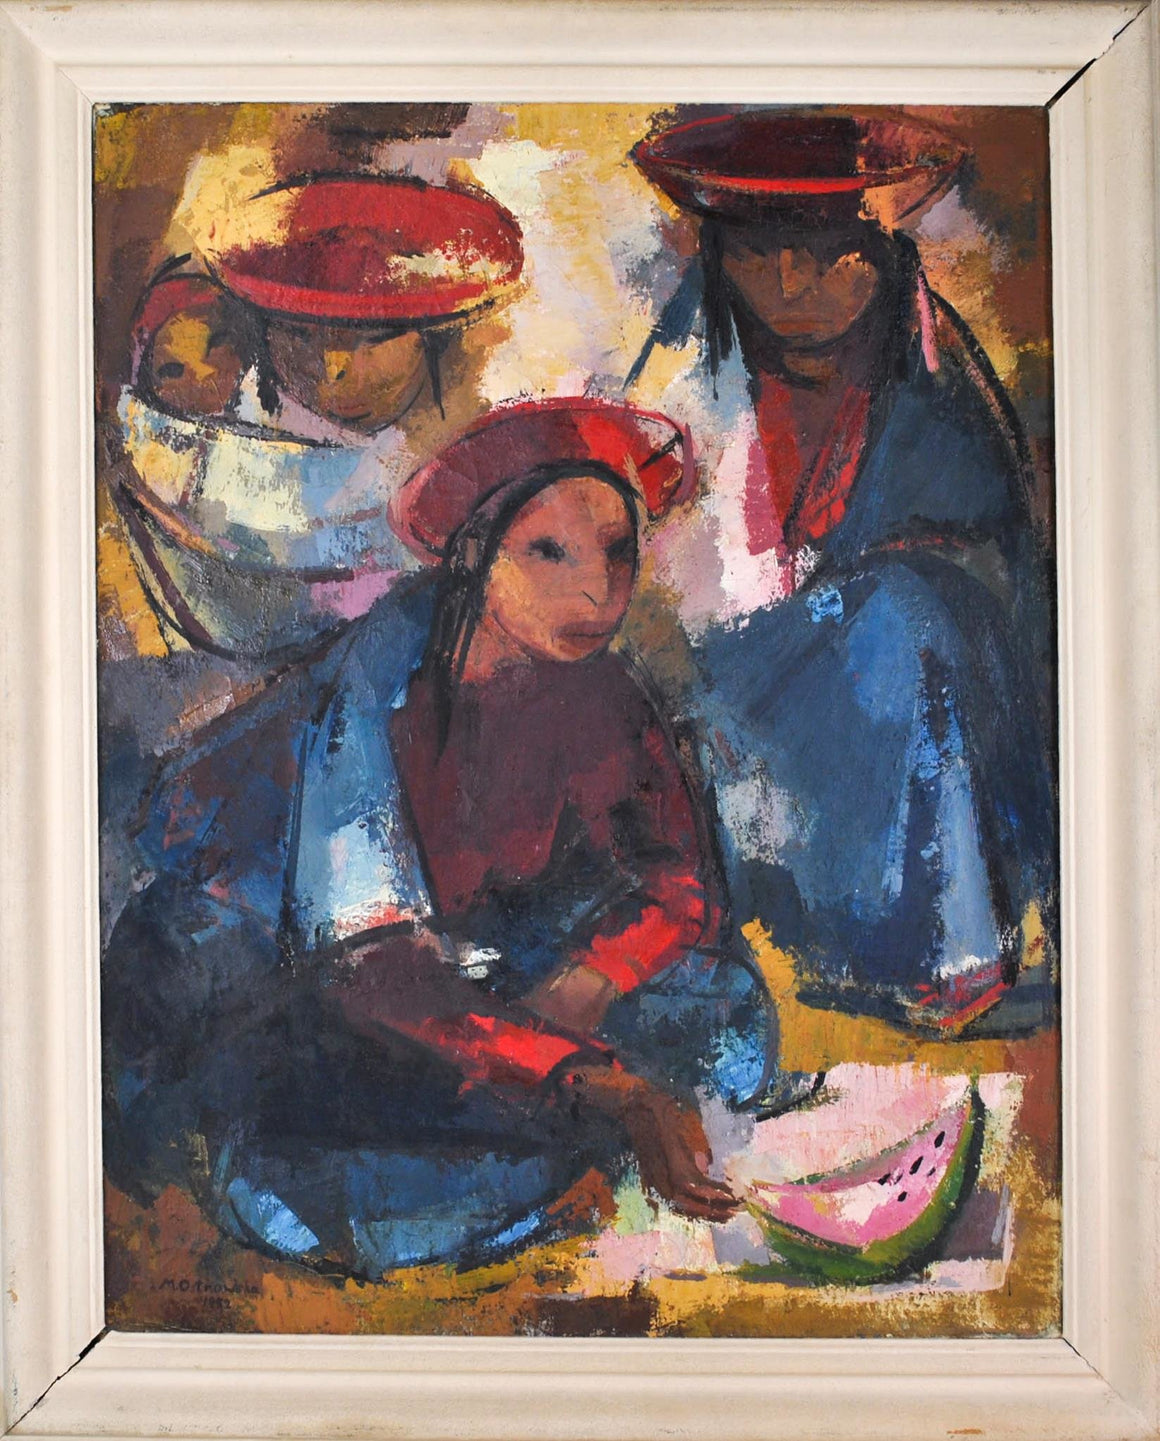 1952 Quechua Peruvian Mother with Child by Ostnowska Large Oil  Painting 34x42